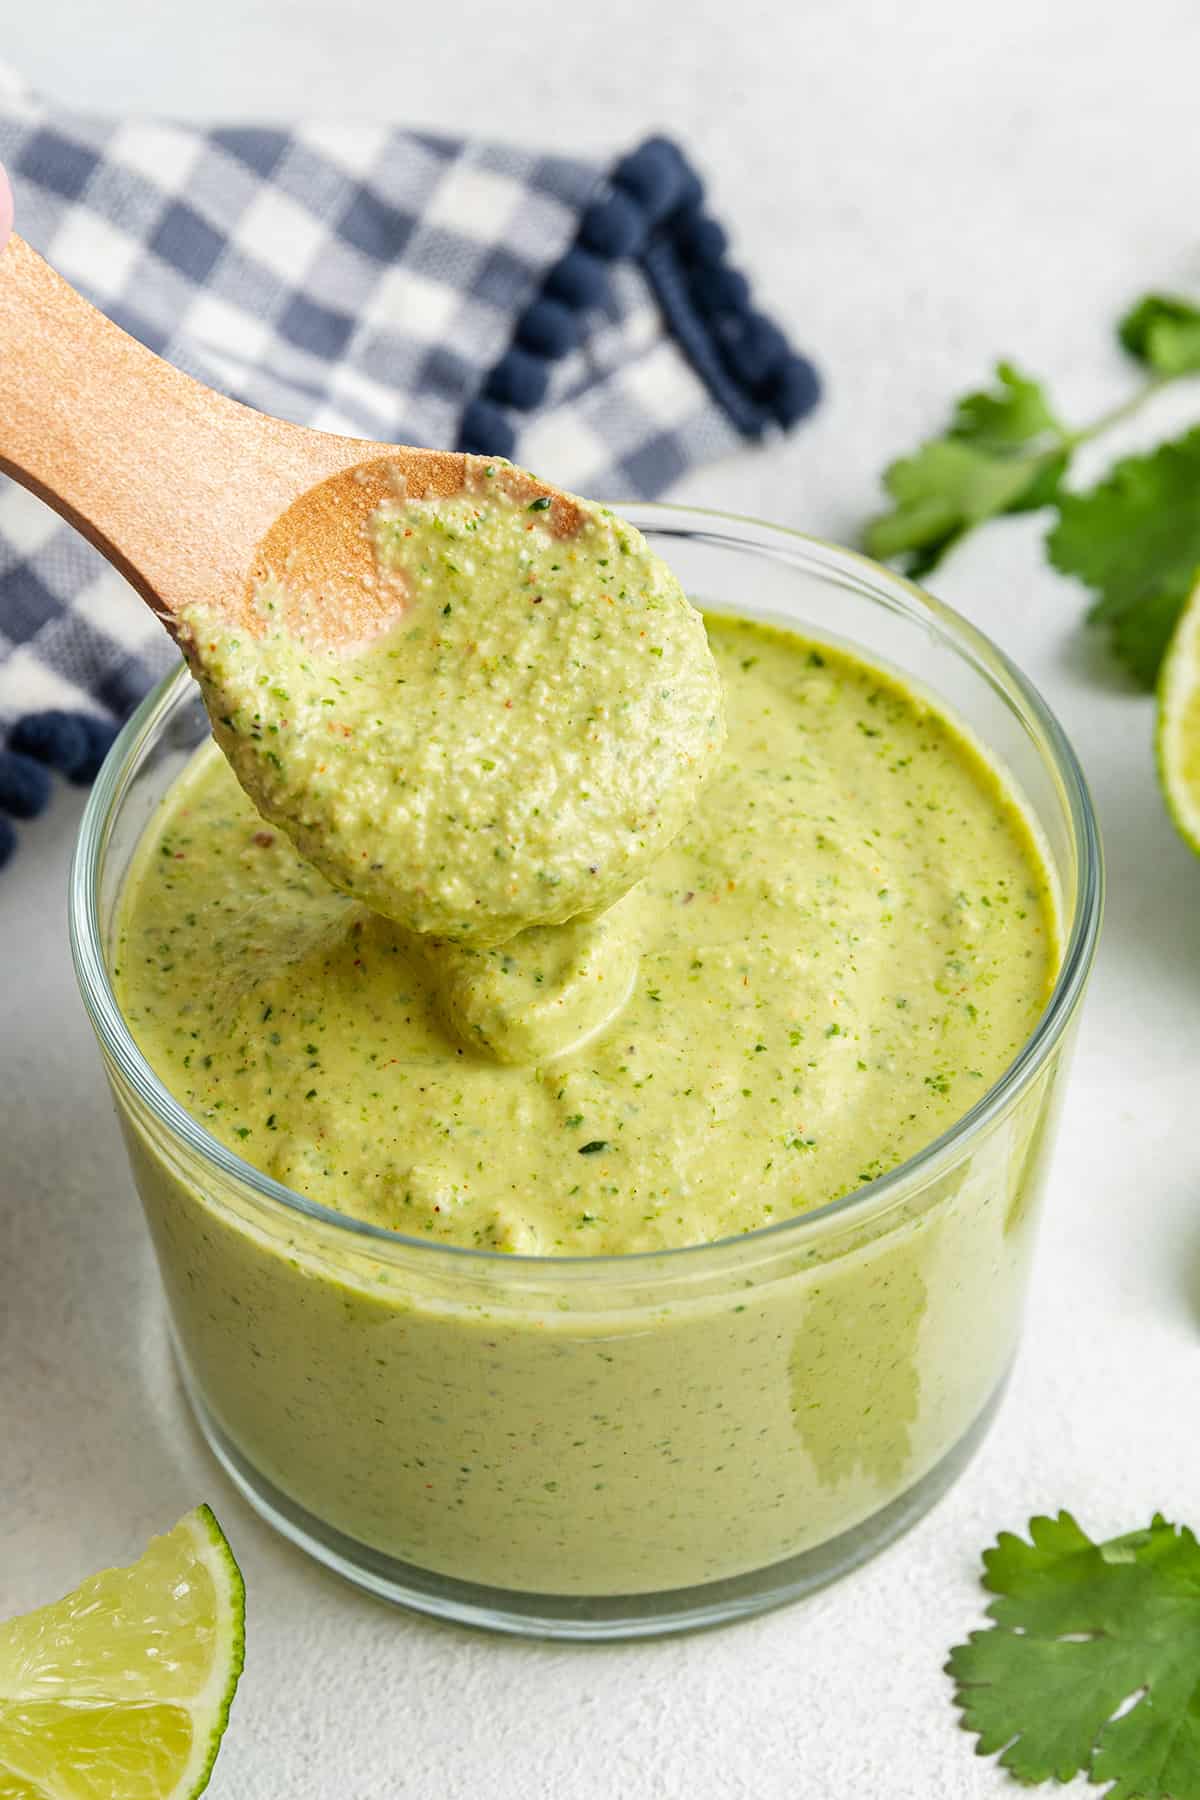 A jar of cilantro lime sauce with a spoon being removed from it, surrounded by lime slices, cilantro leaves, and a kitchen towel